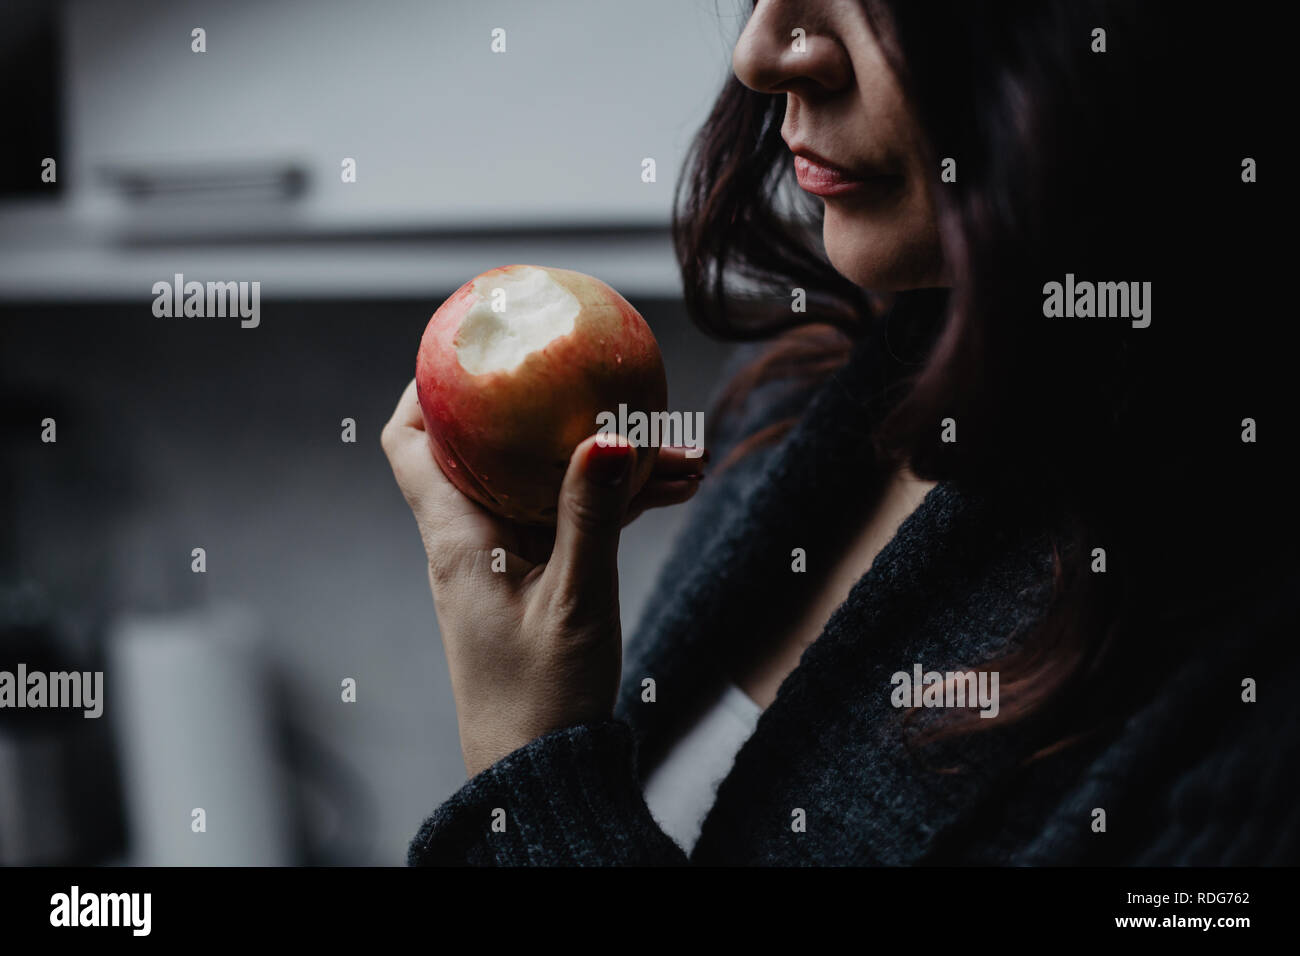 Beautiful brunette woman holding an apple in the kitchen Stock Photo